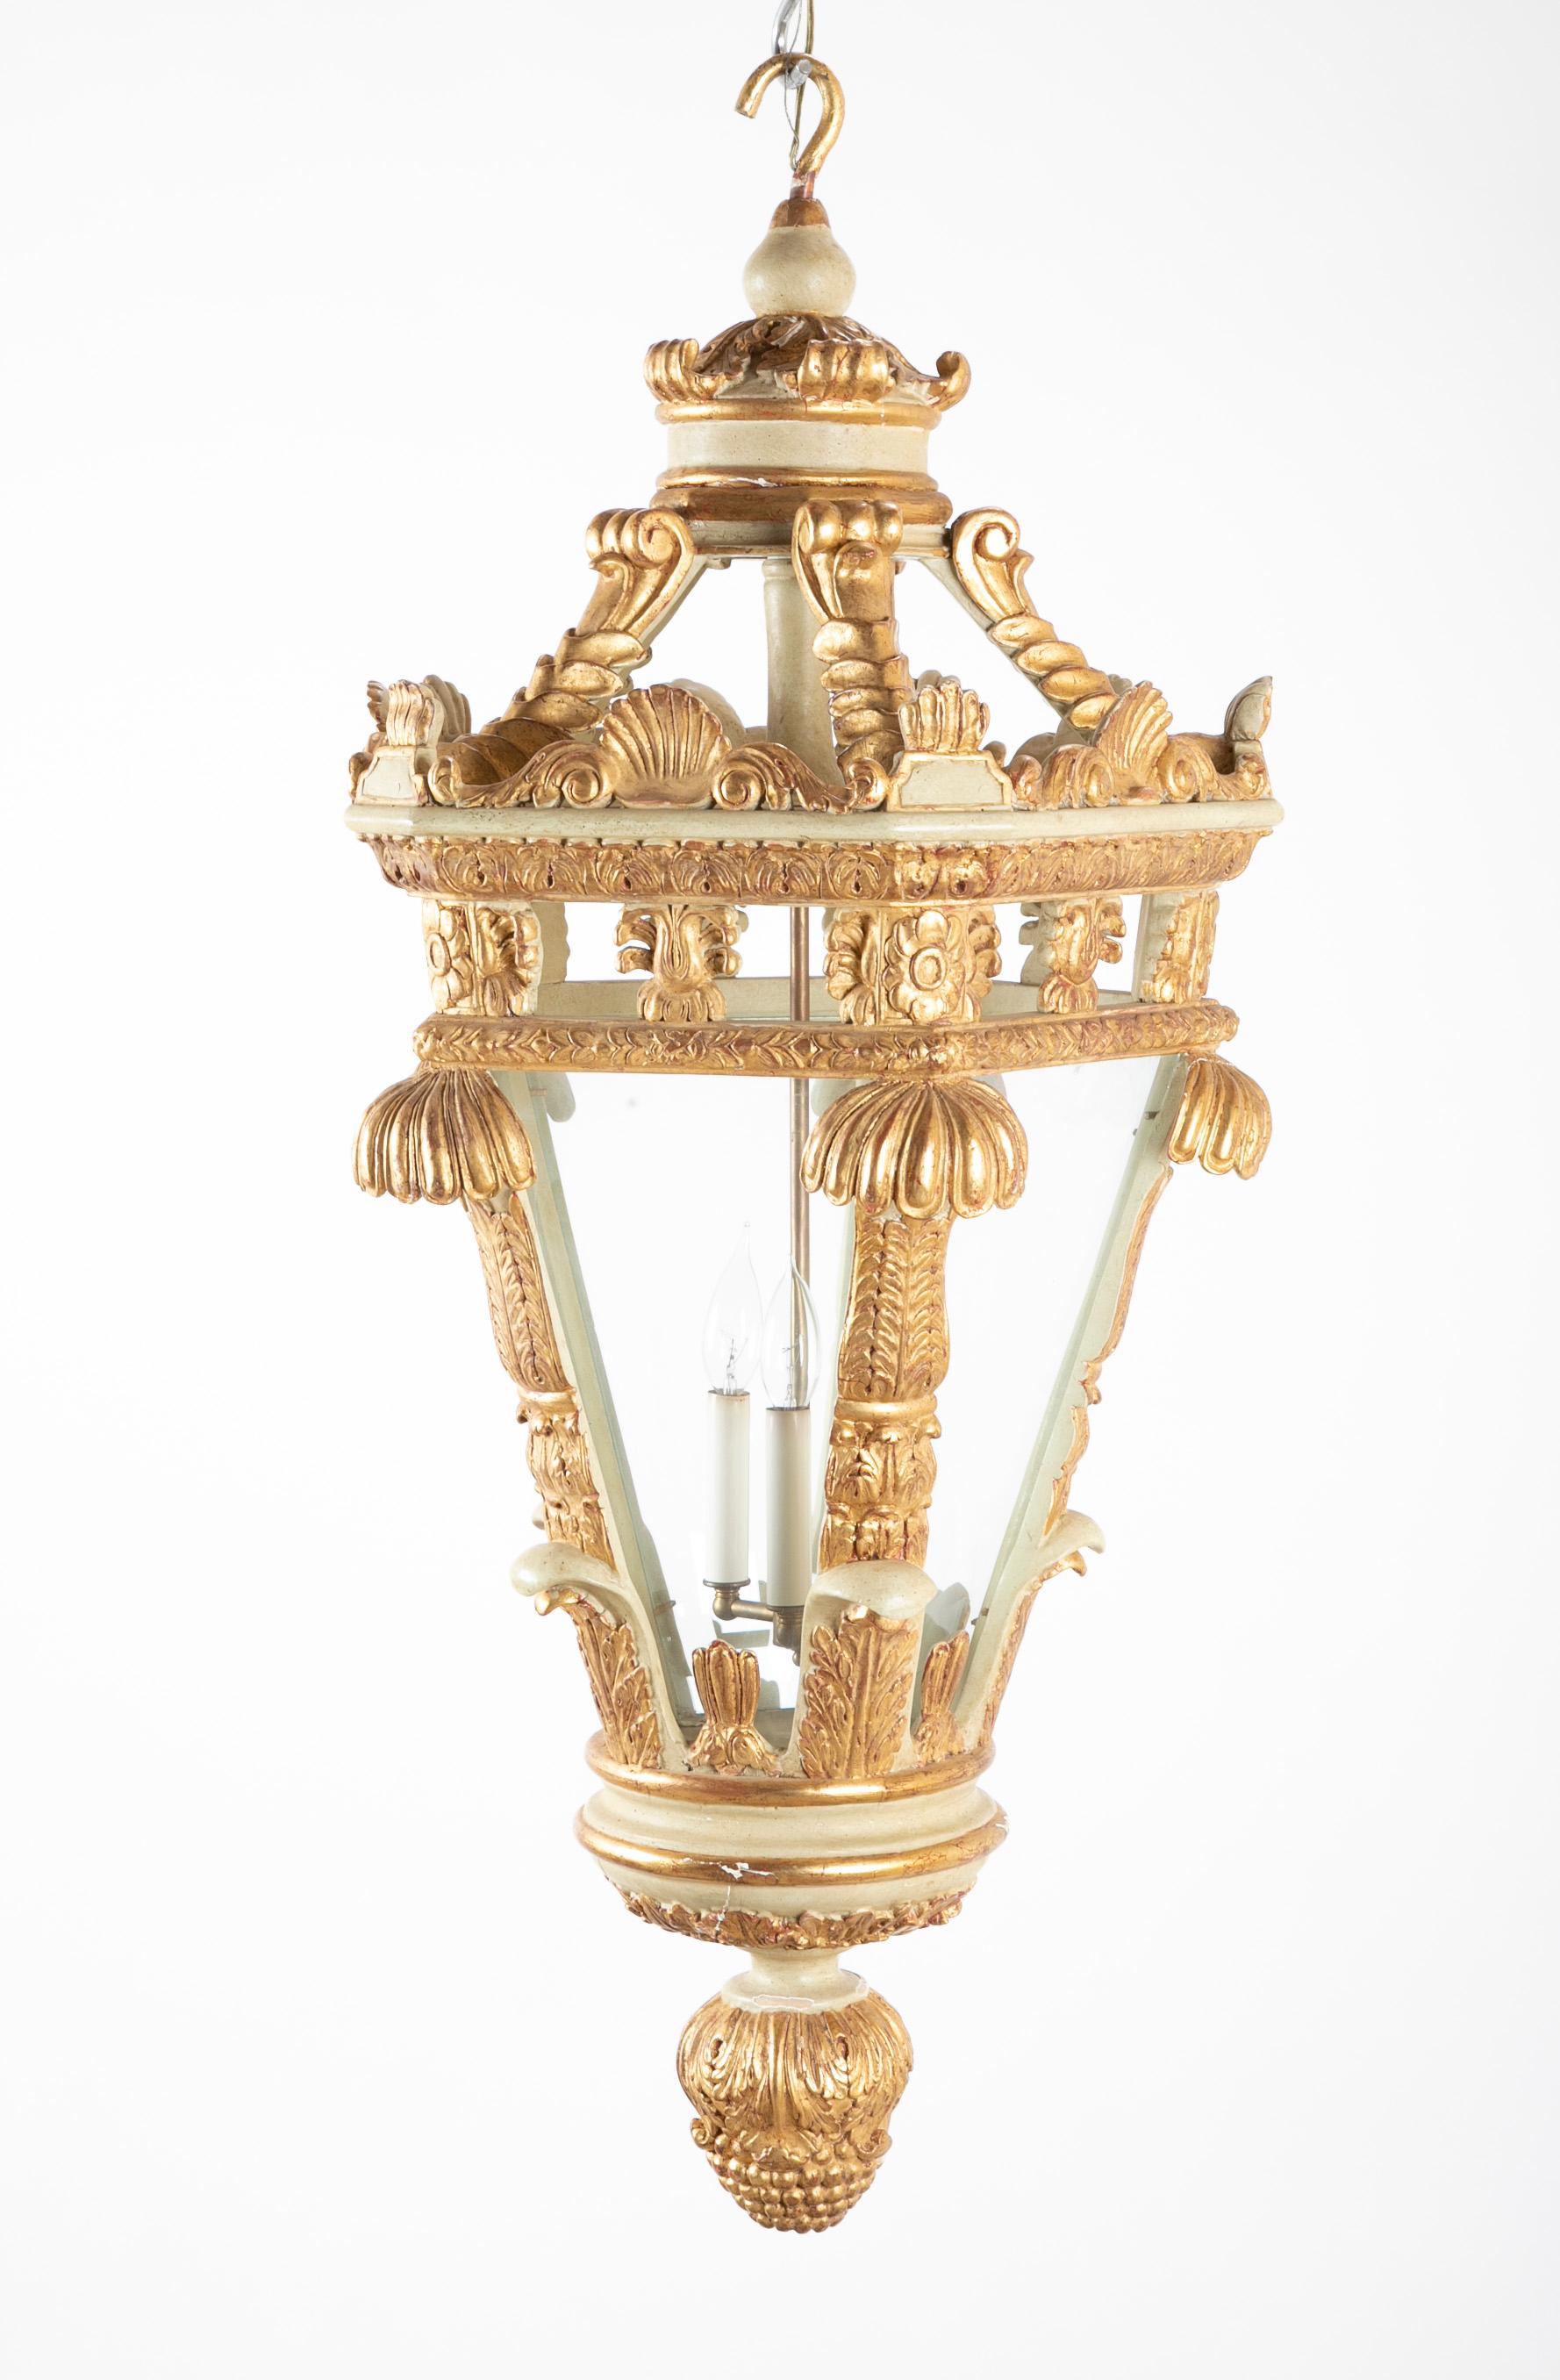 Italian painted and gilded five-sided lantern with shell and scroll carvings and elaborate finial.